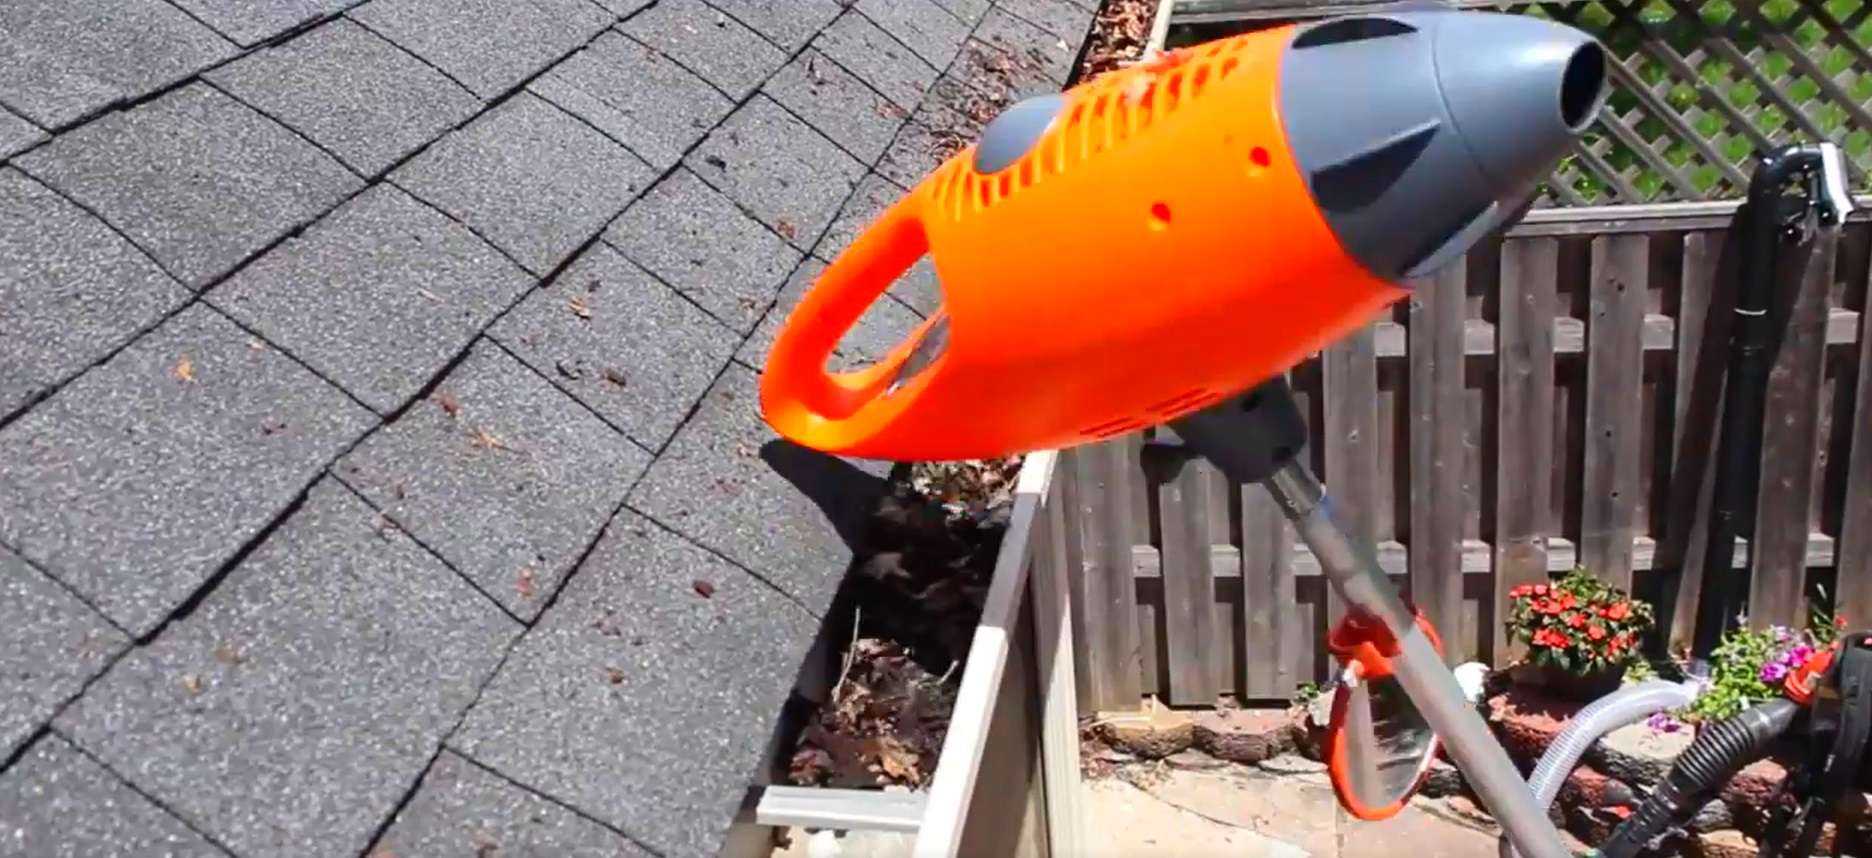 Taboola Ad Example 36547 - The Permanent Solution To Clogged Gutters Is Found!